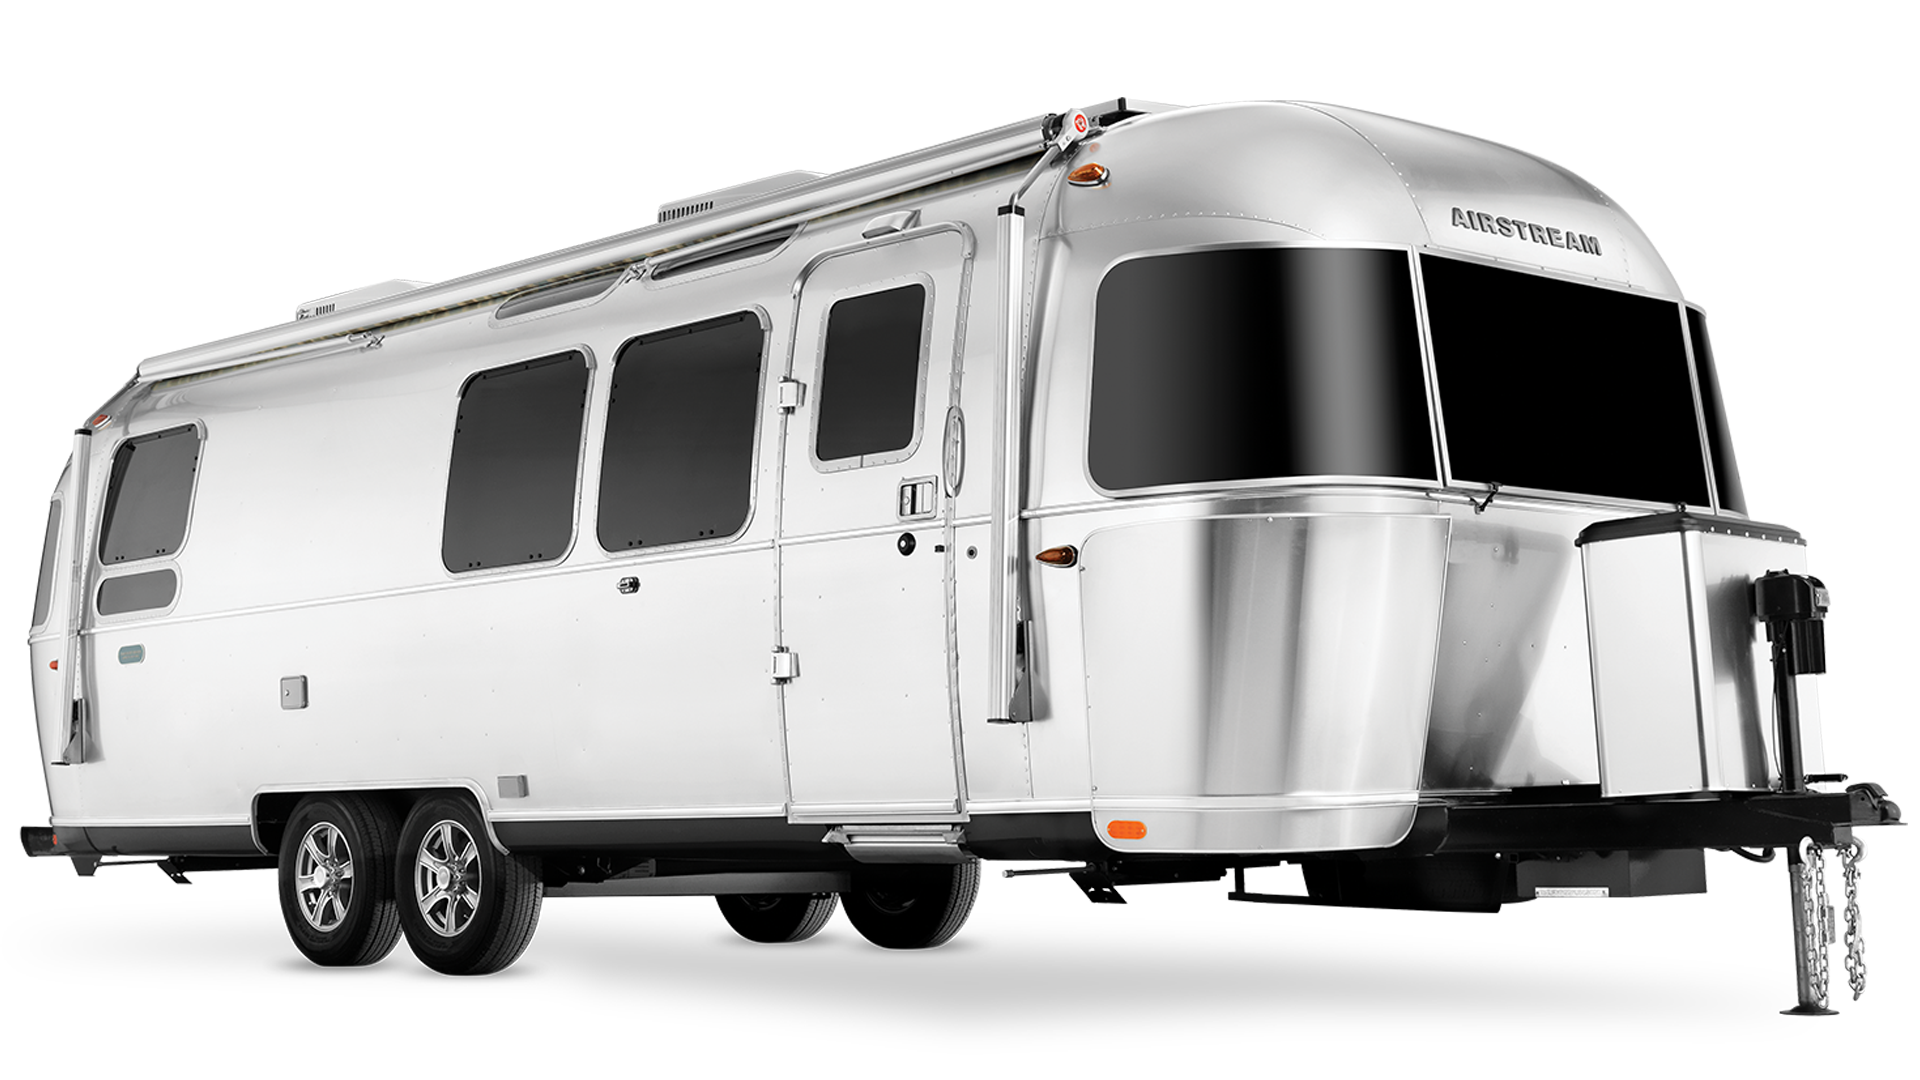 Airstream Pottery Barn Special Edition Travel Trailer exterior image